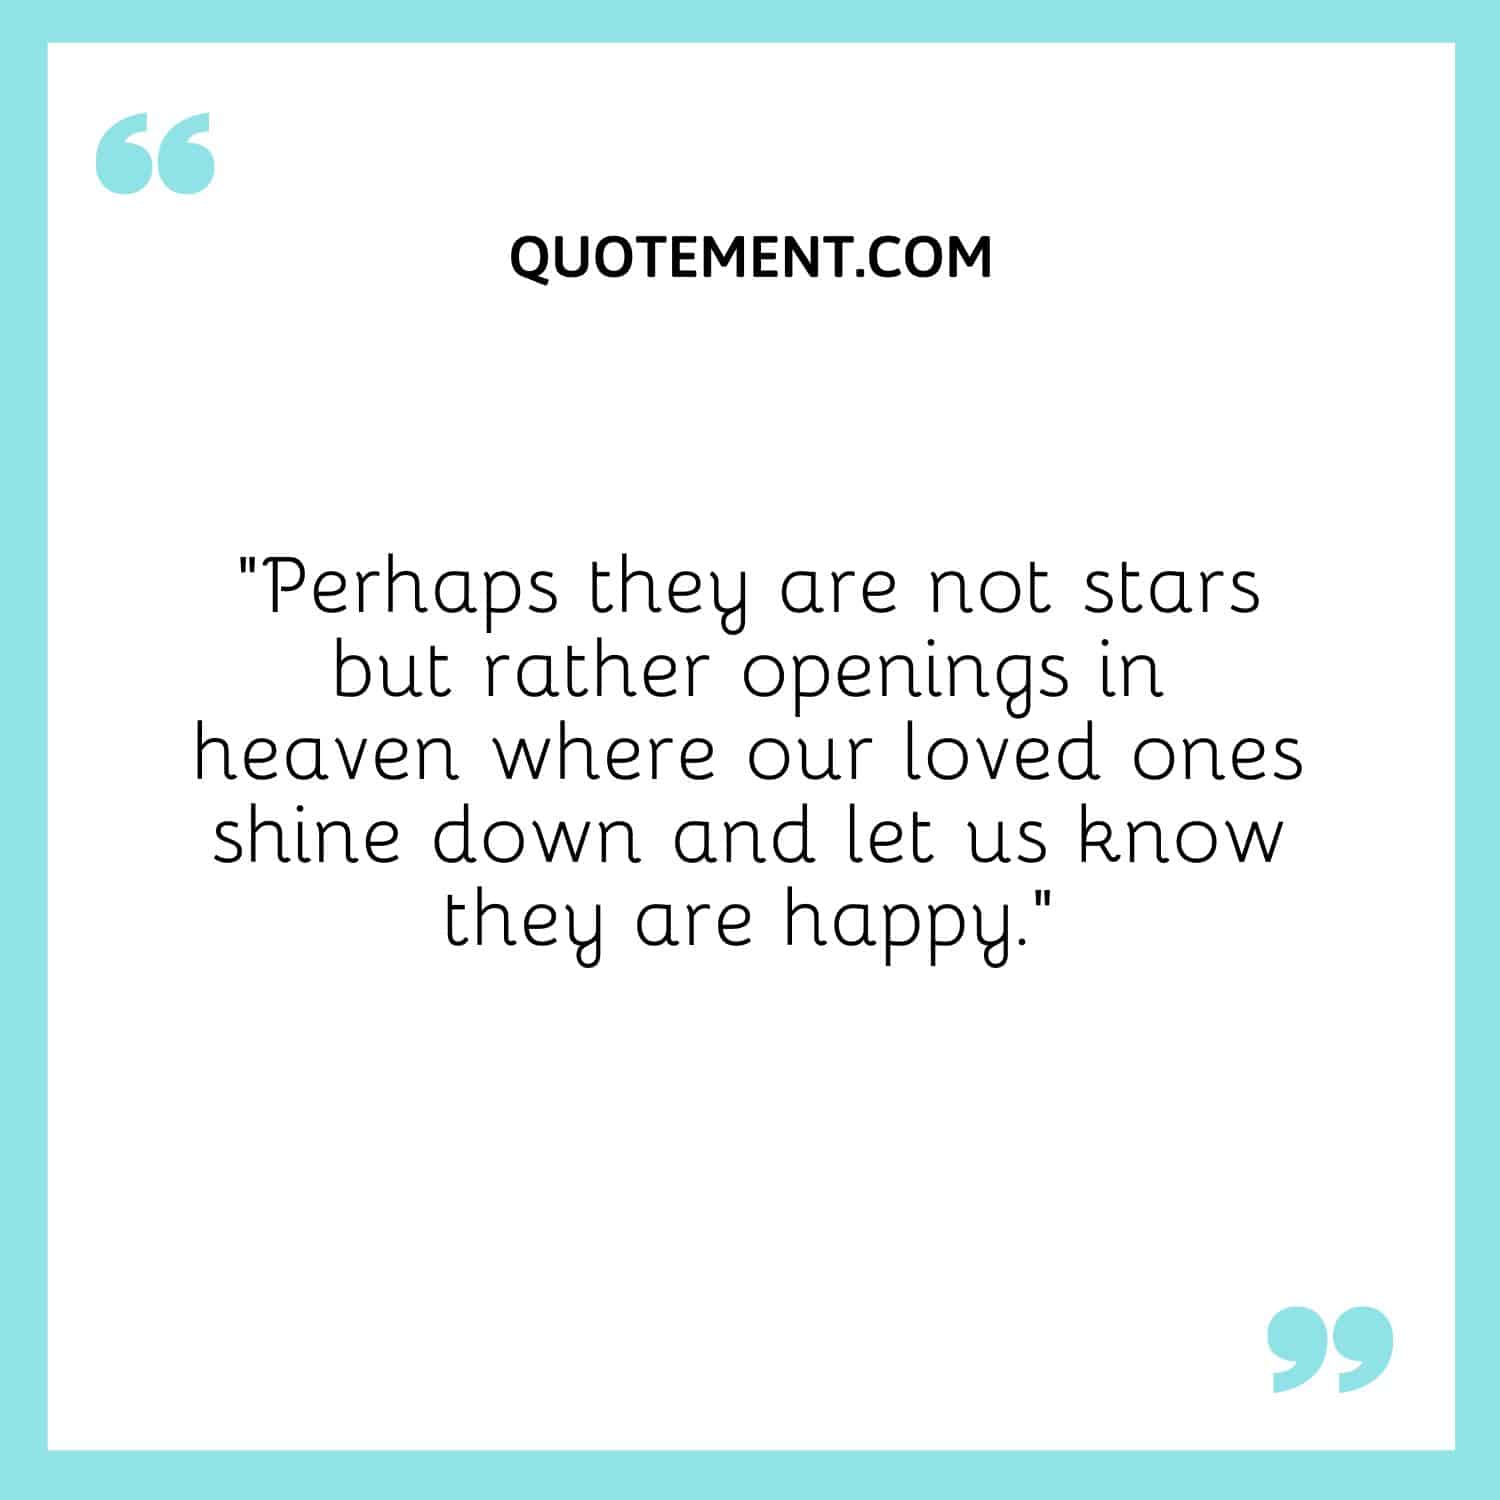 Perhaps they are not stars